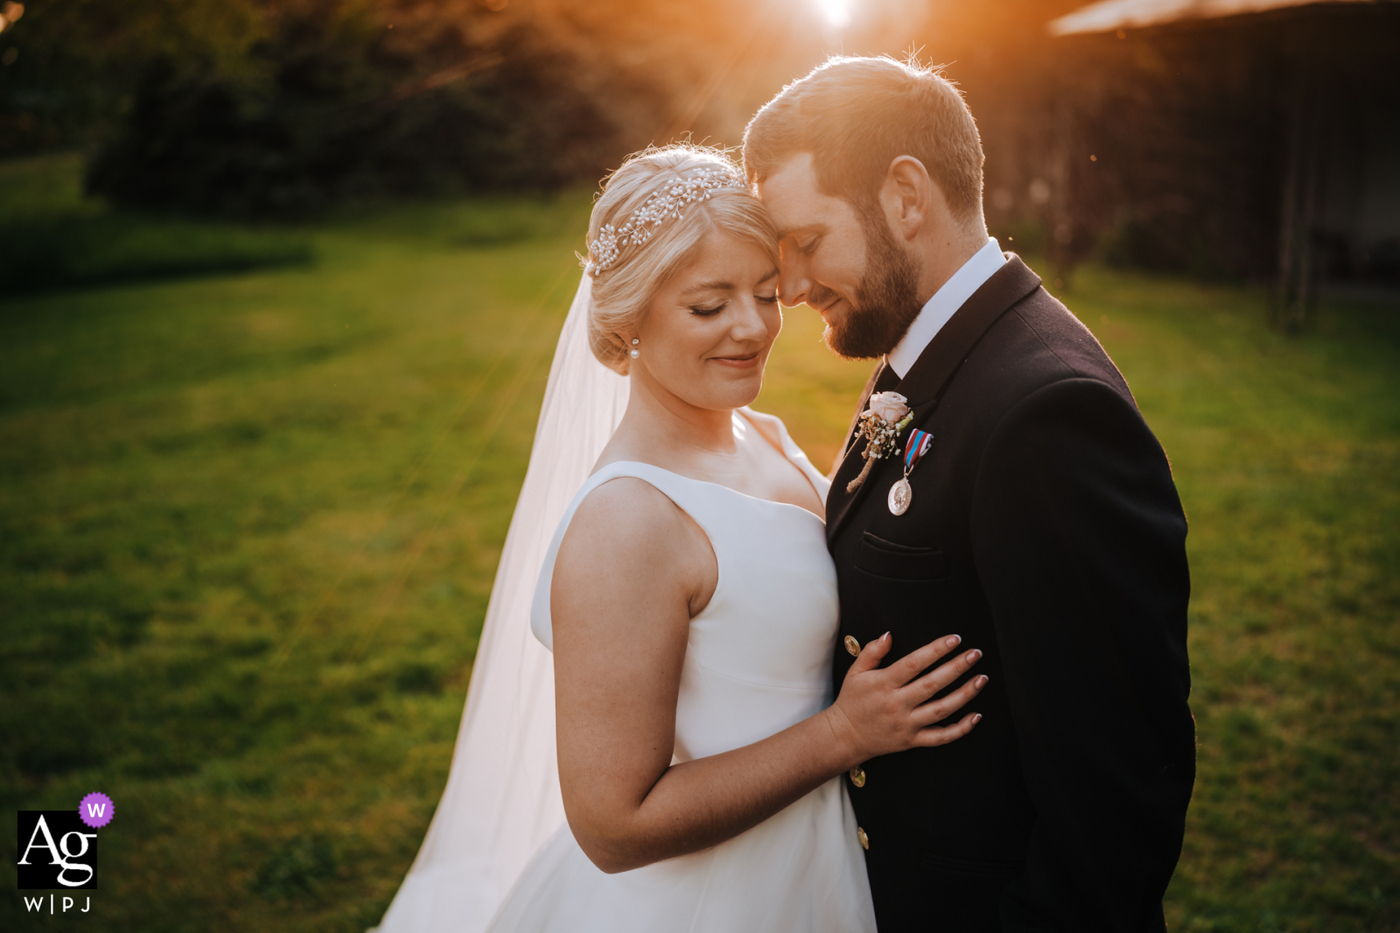 Alex Buckland Photography is a studio owned and operated by Alex Buckland, an award-winning wedding photographer based in Eastbourne, covering the south of the UK.